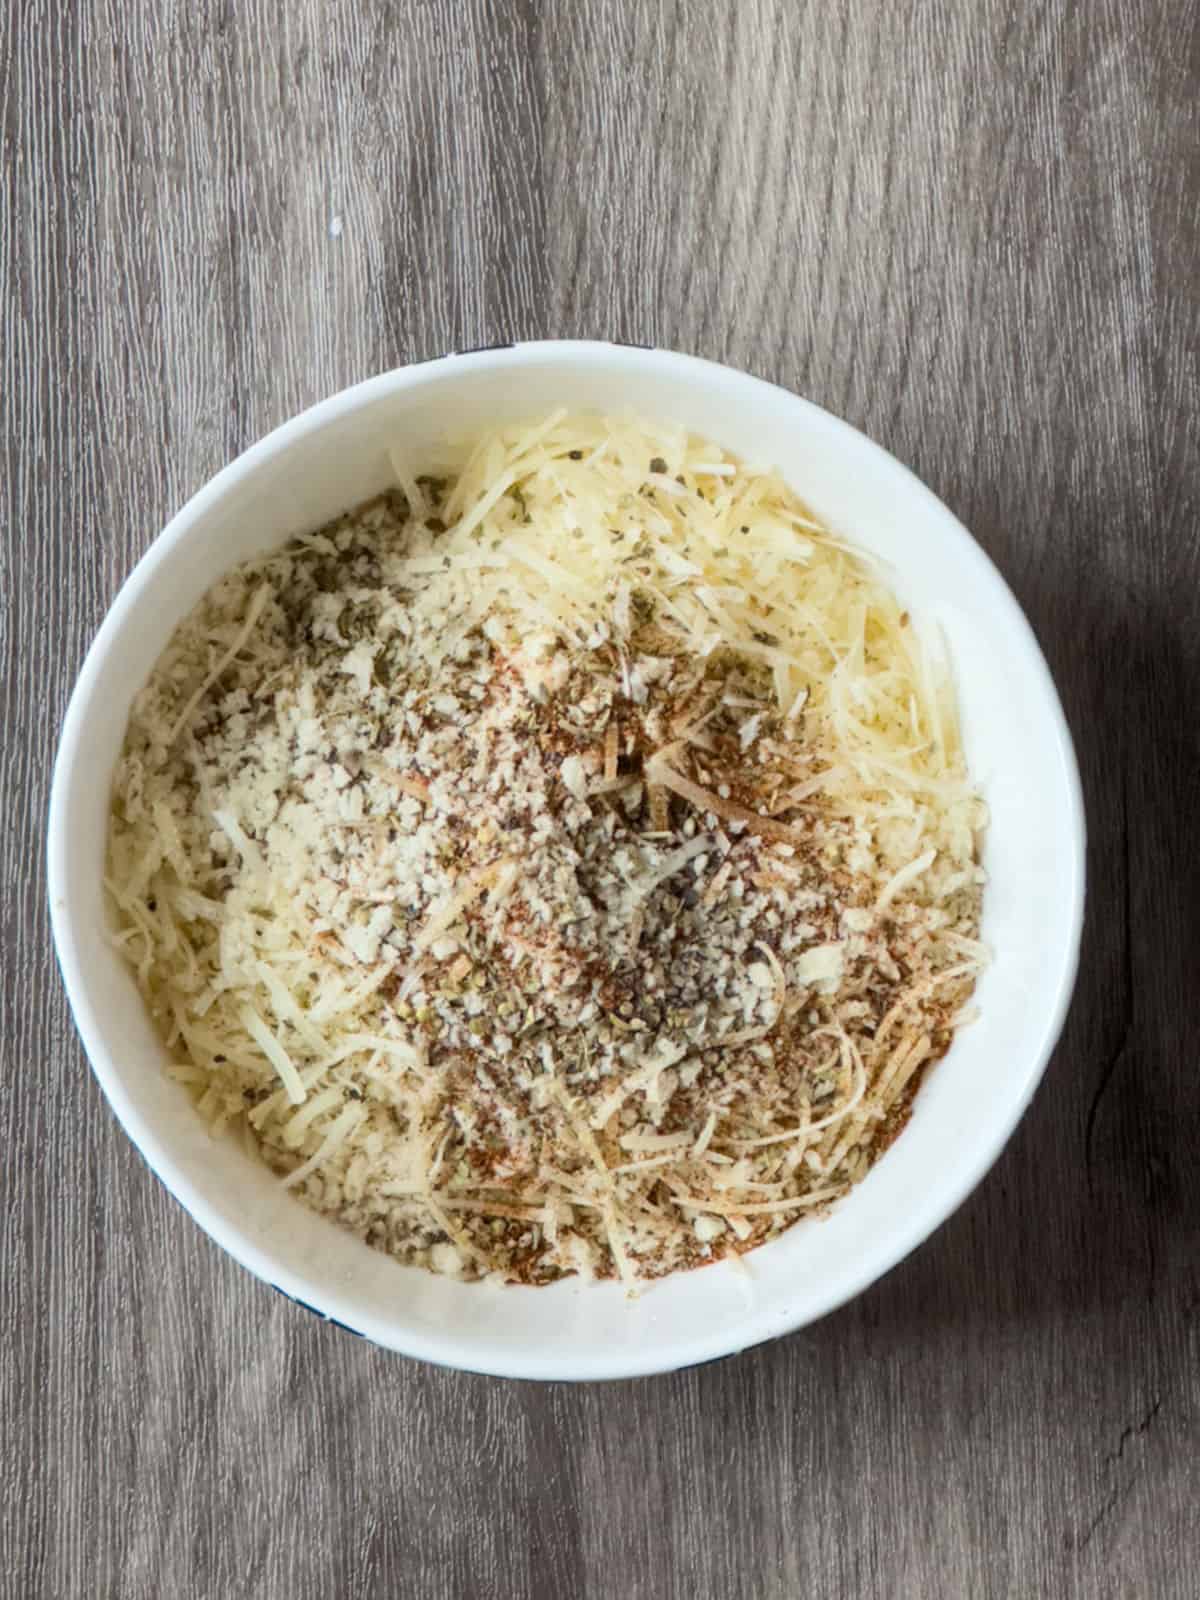 a white bowl on a wooden background with seasoning, shredded parmesan and panic bread crumbs mixed together